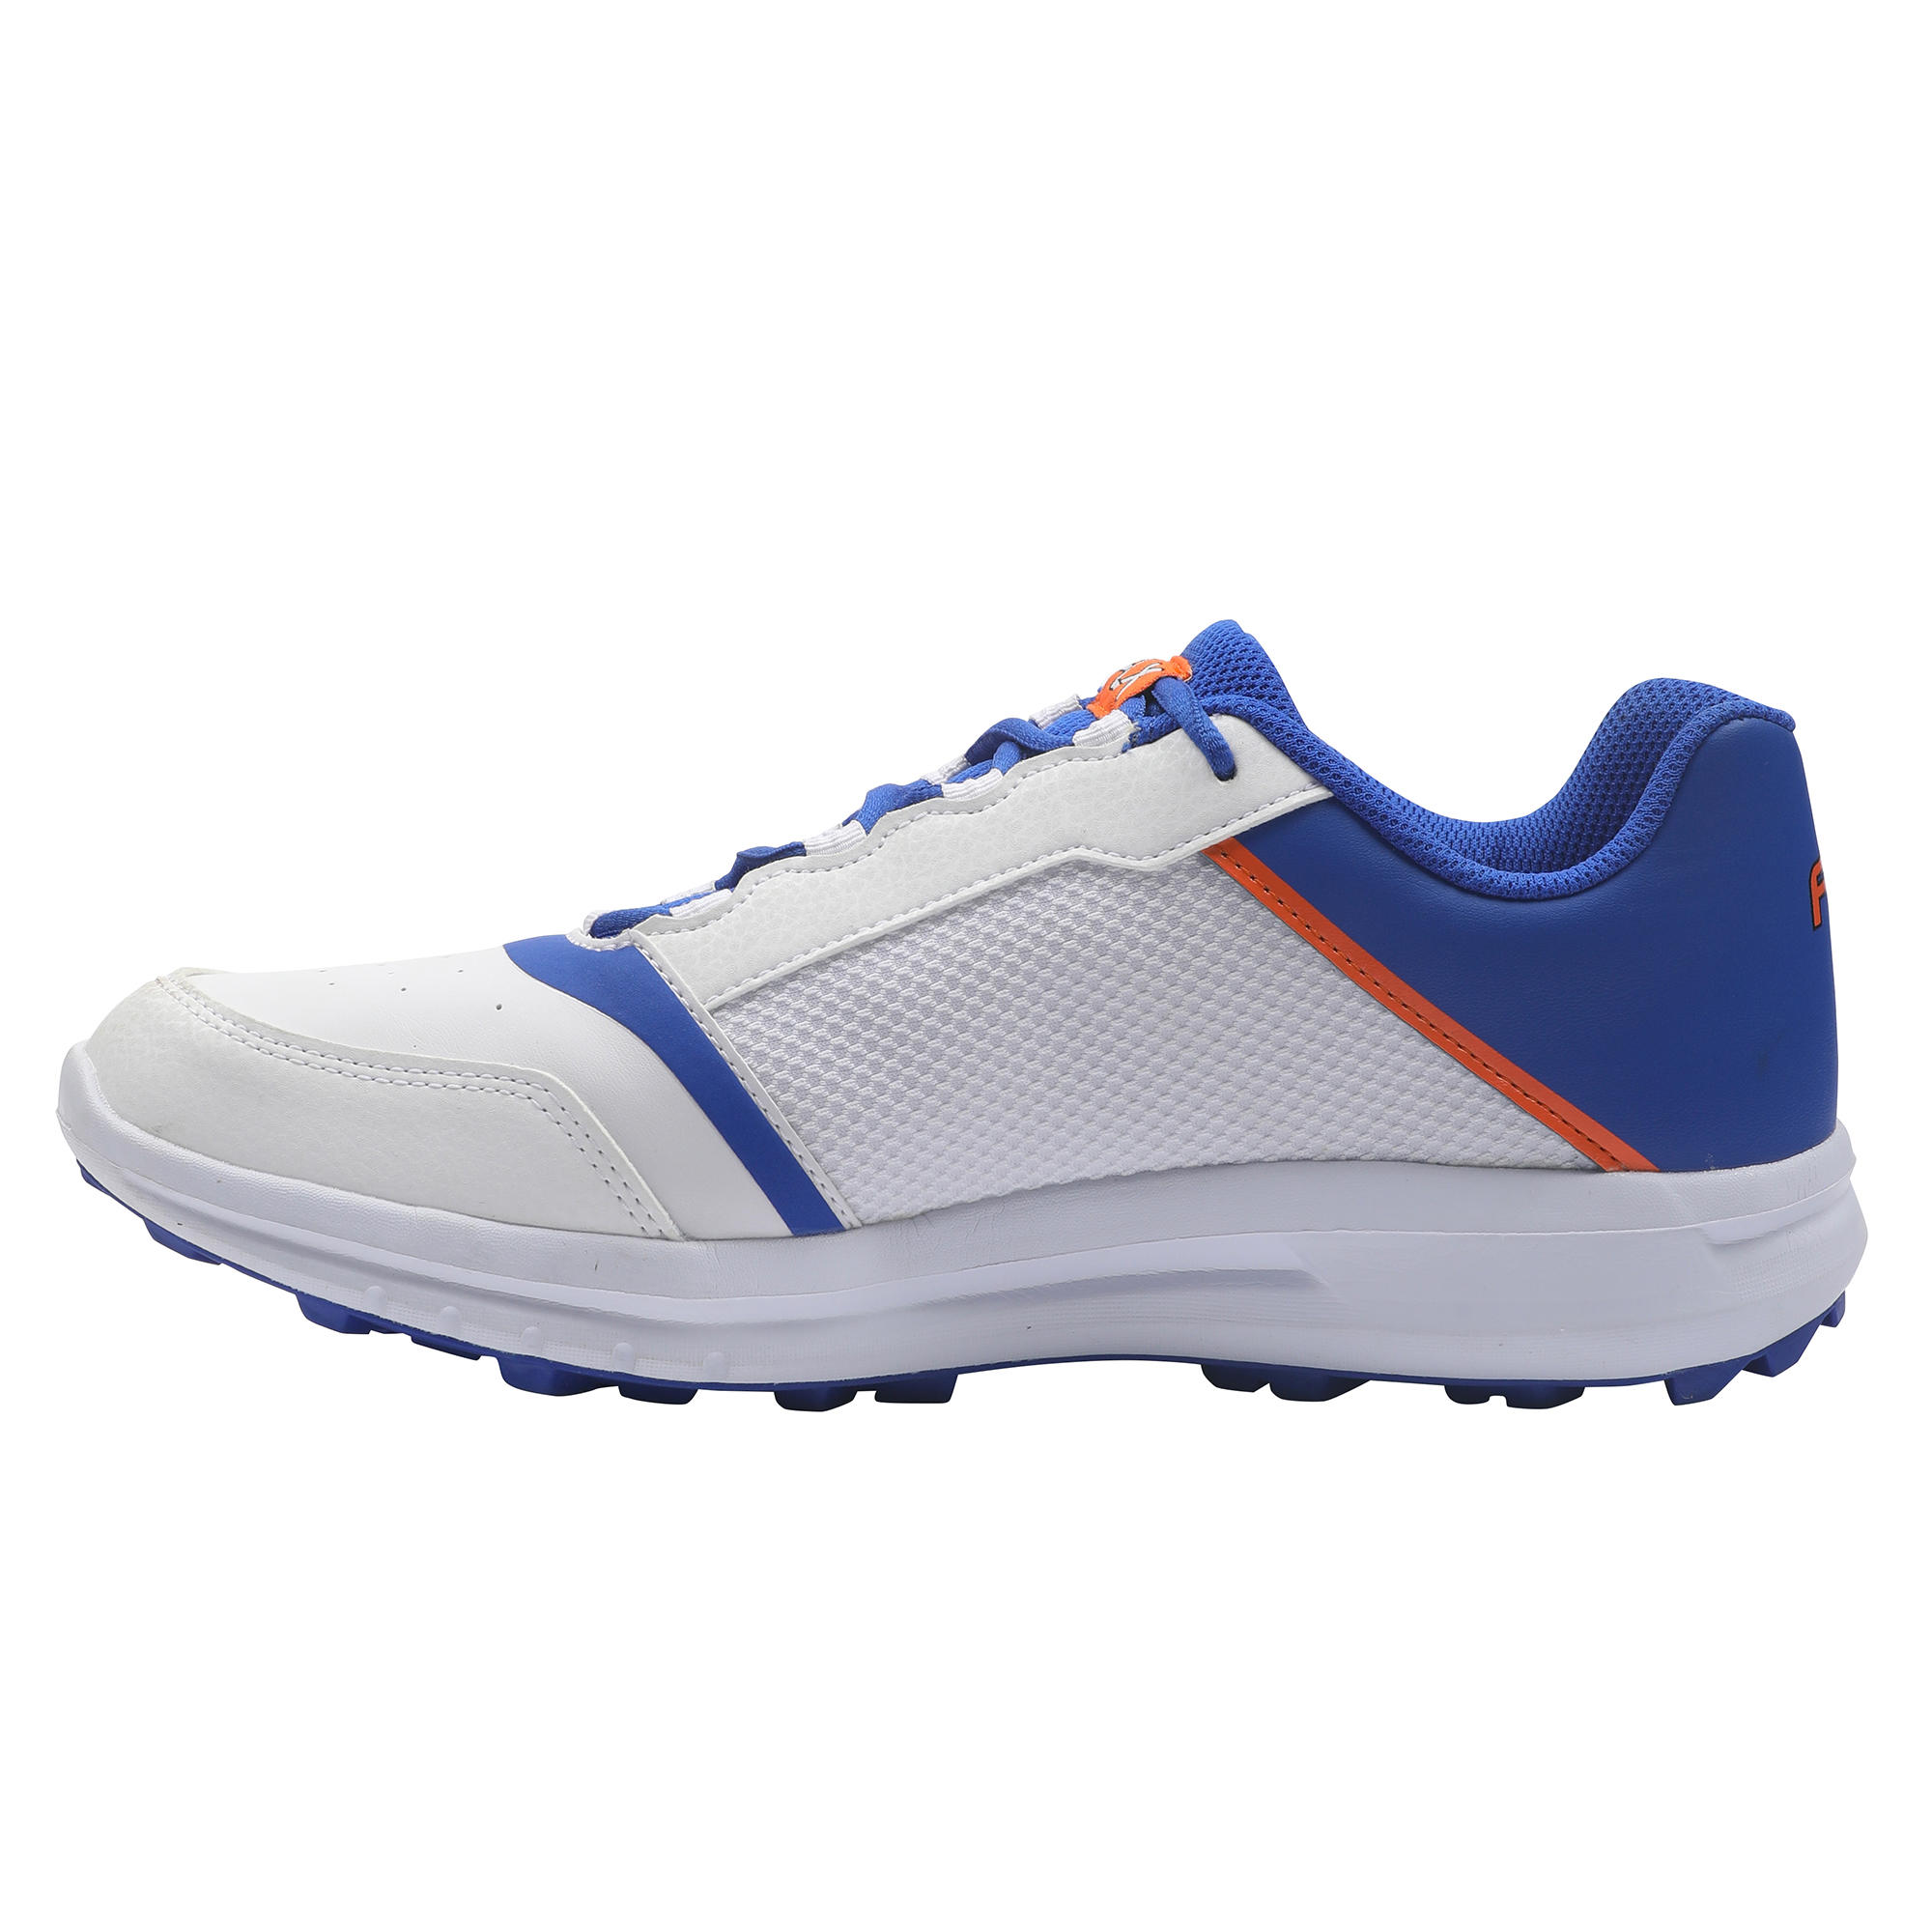 Decathlon Sports India - Light weight cricket shoes. Sign in-  https://bit.ly/3tV9i5i | Facebook